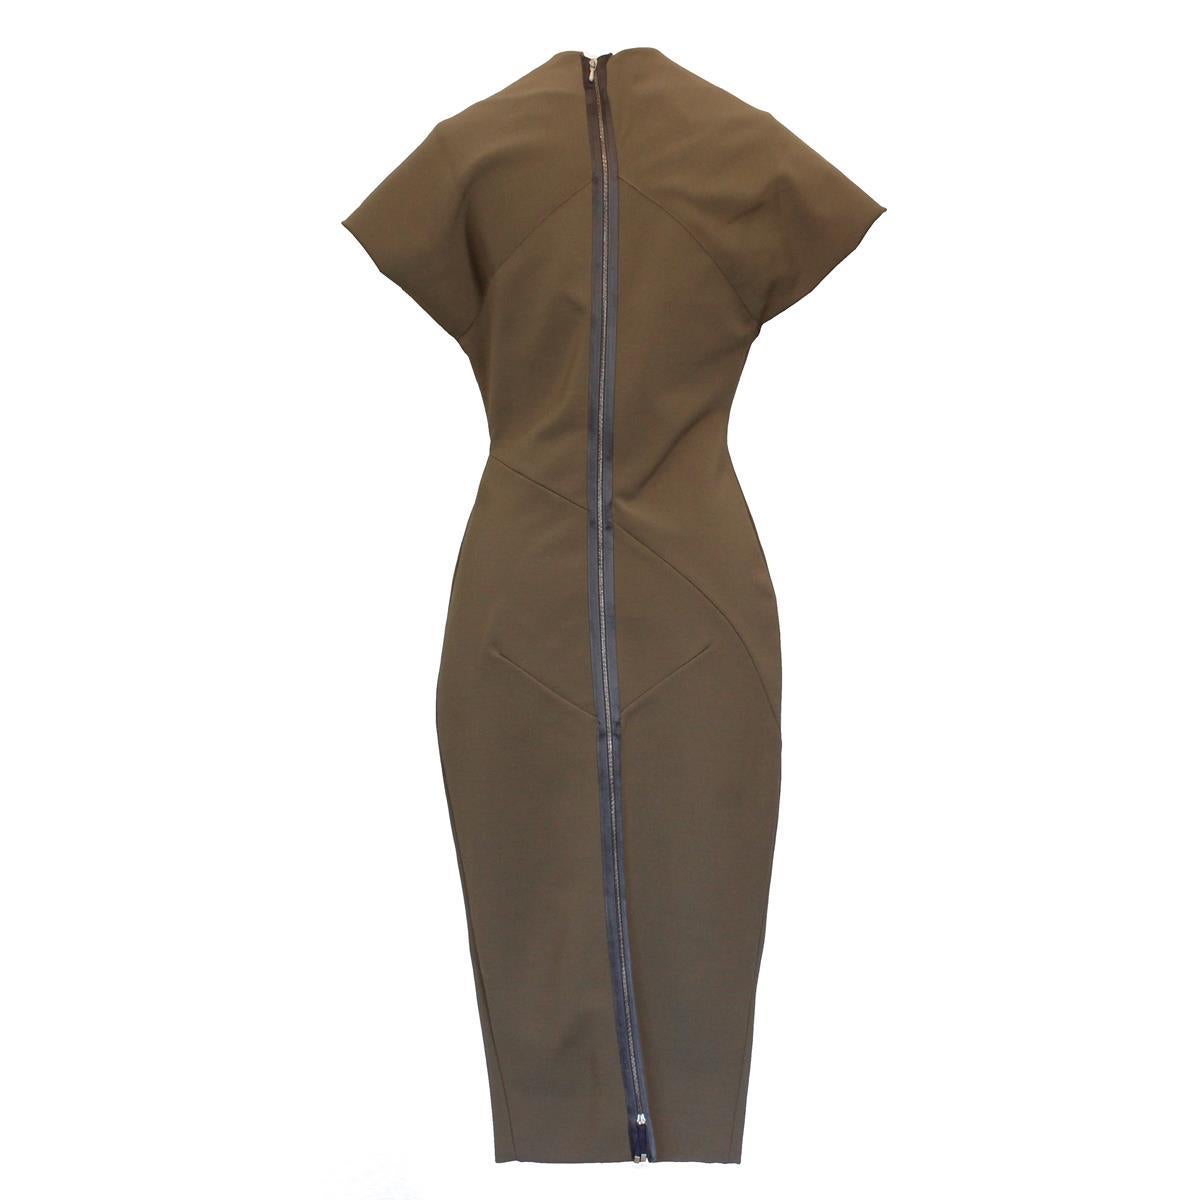 Superb Victoria Beckham dress
Viscose (86%) polyamide (10%) and elastane (4%)
Tobacco color
Sleeveless
Back zip closure
Total length cm 108 (42.5 inches)
Original price € 1500
Worldwide express shipping included in the price !